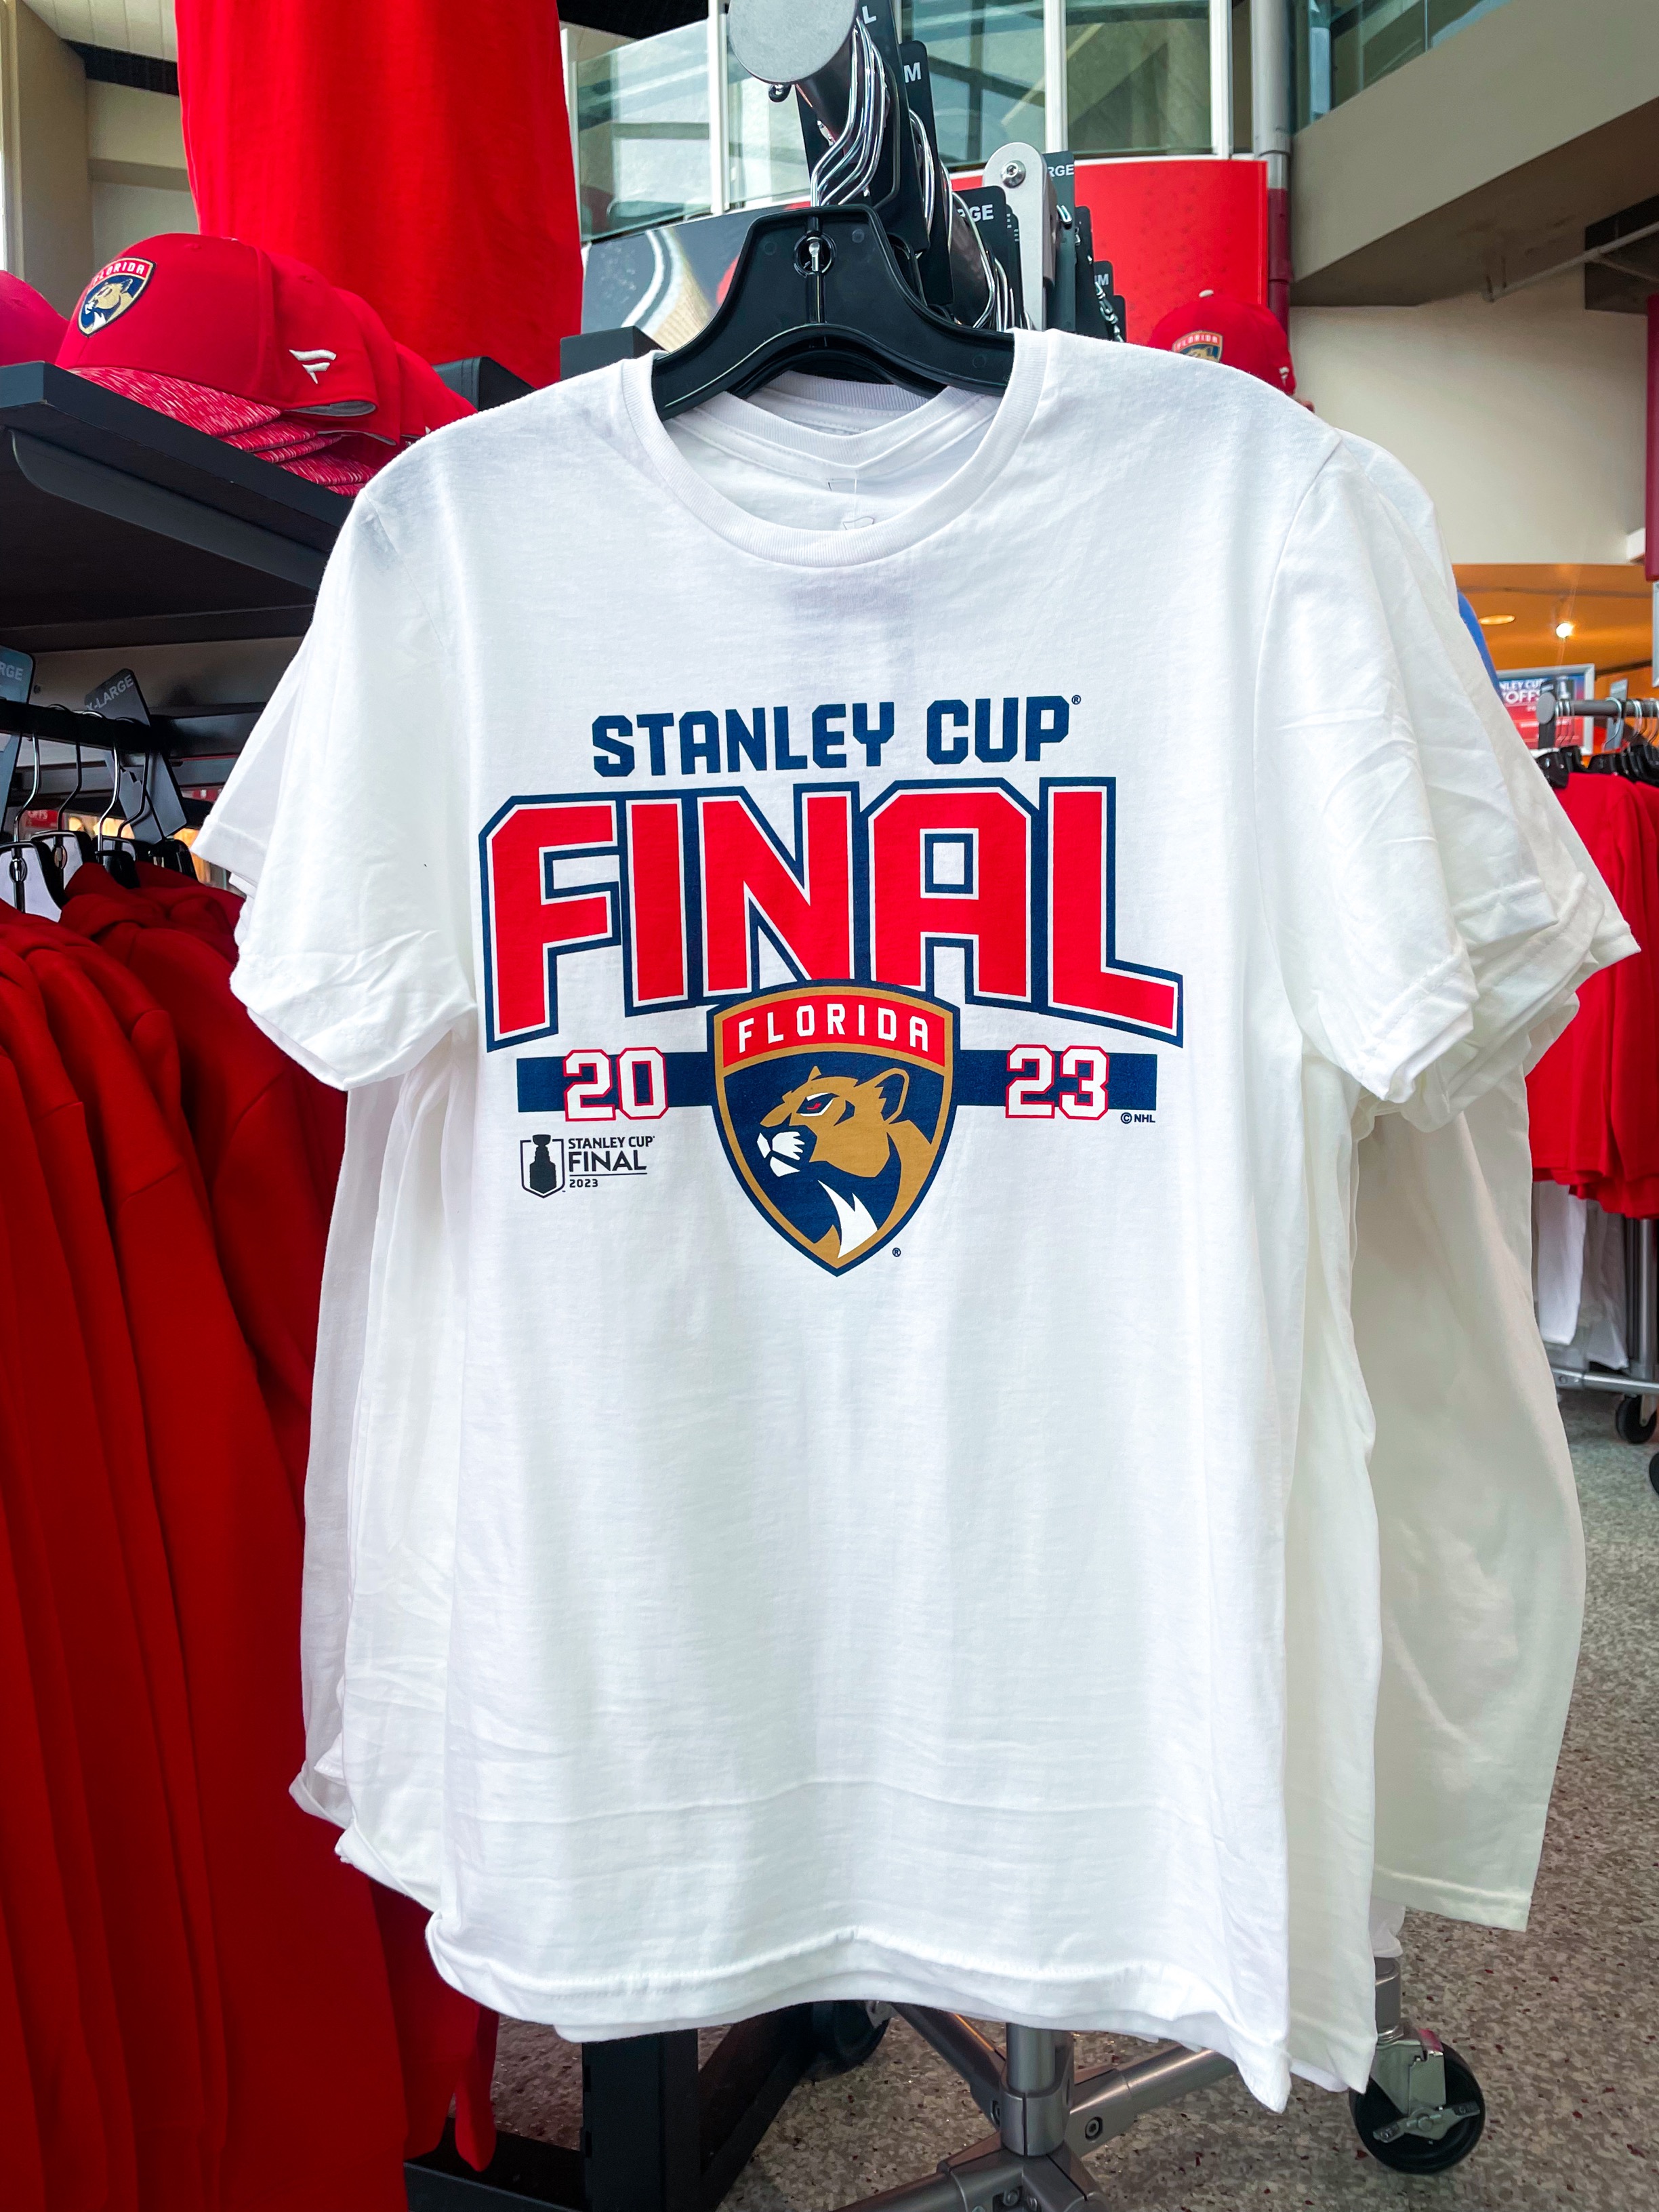 Florida Panthers on X: RT @FlaTeamShop: ECF gear is stocked & ready to  go in Pantherland! Stop by on your way into tonight's game to check out  these items & muc… /